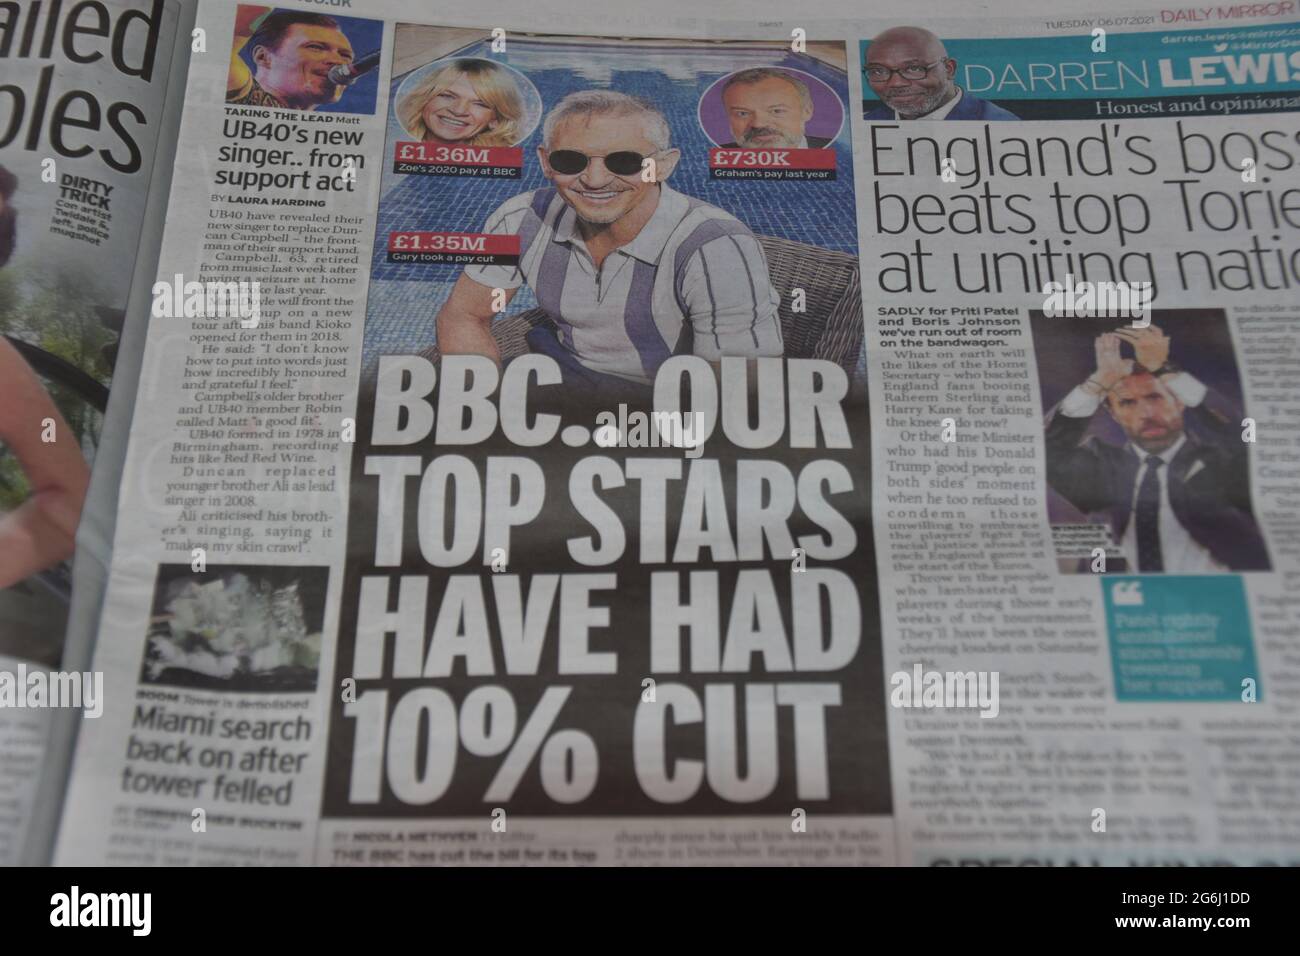 Article in the Daily Mirror (British Newspaper ) on Tuesday the 6th of July 2021 - BBC, our top stars have had 10% cut Stock Photo